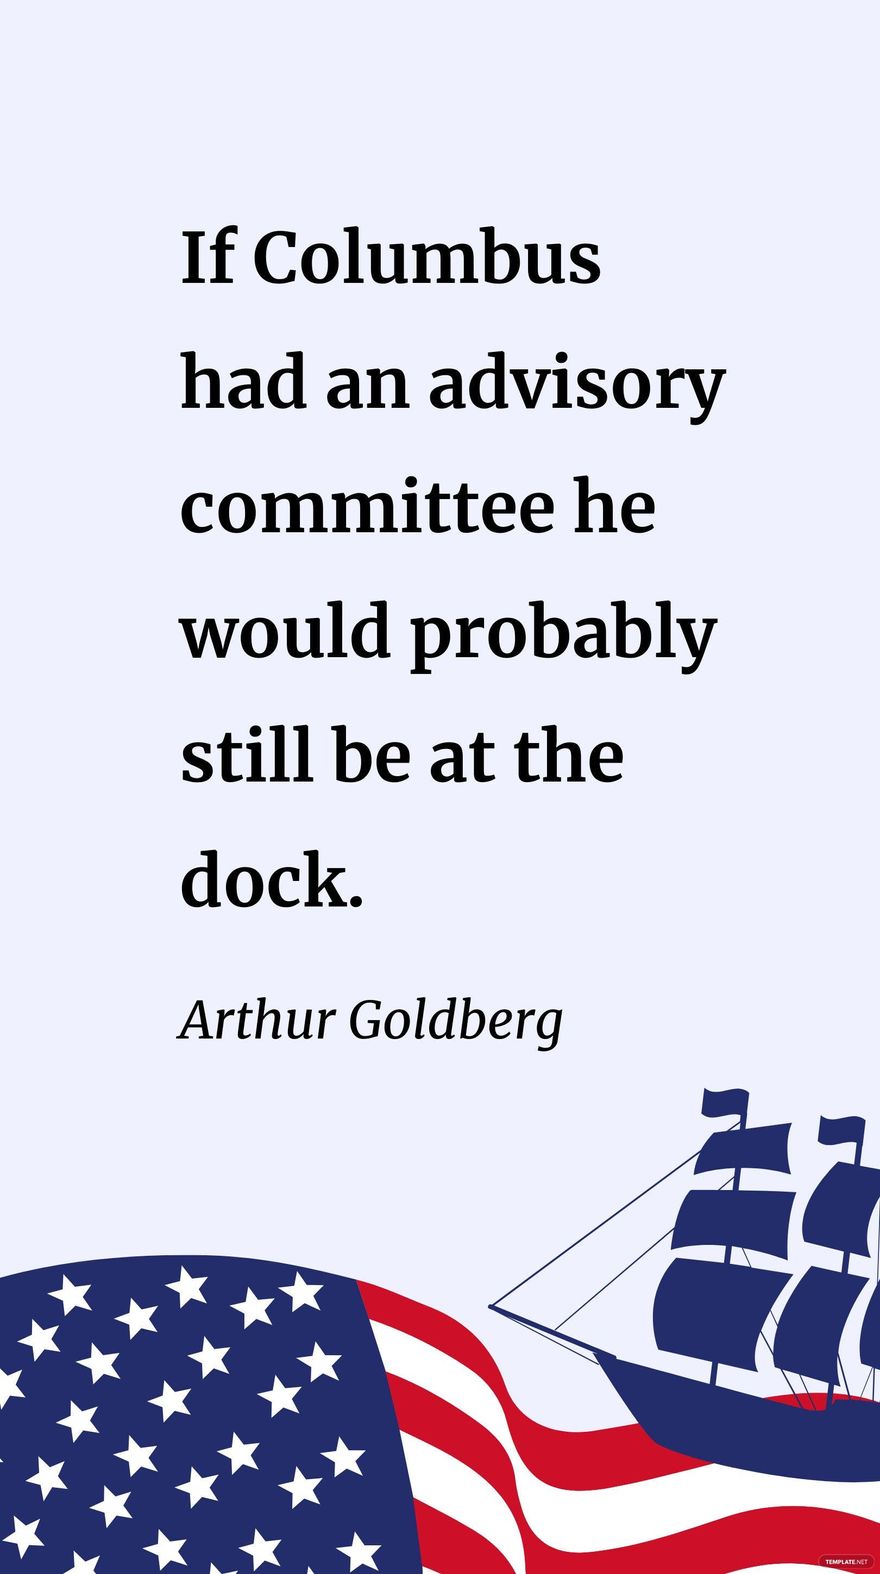 Arthur Goldberg- If Columbus had an advisory committee he would probably still be at the dock.